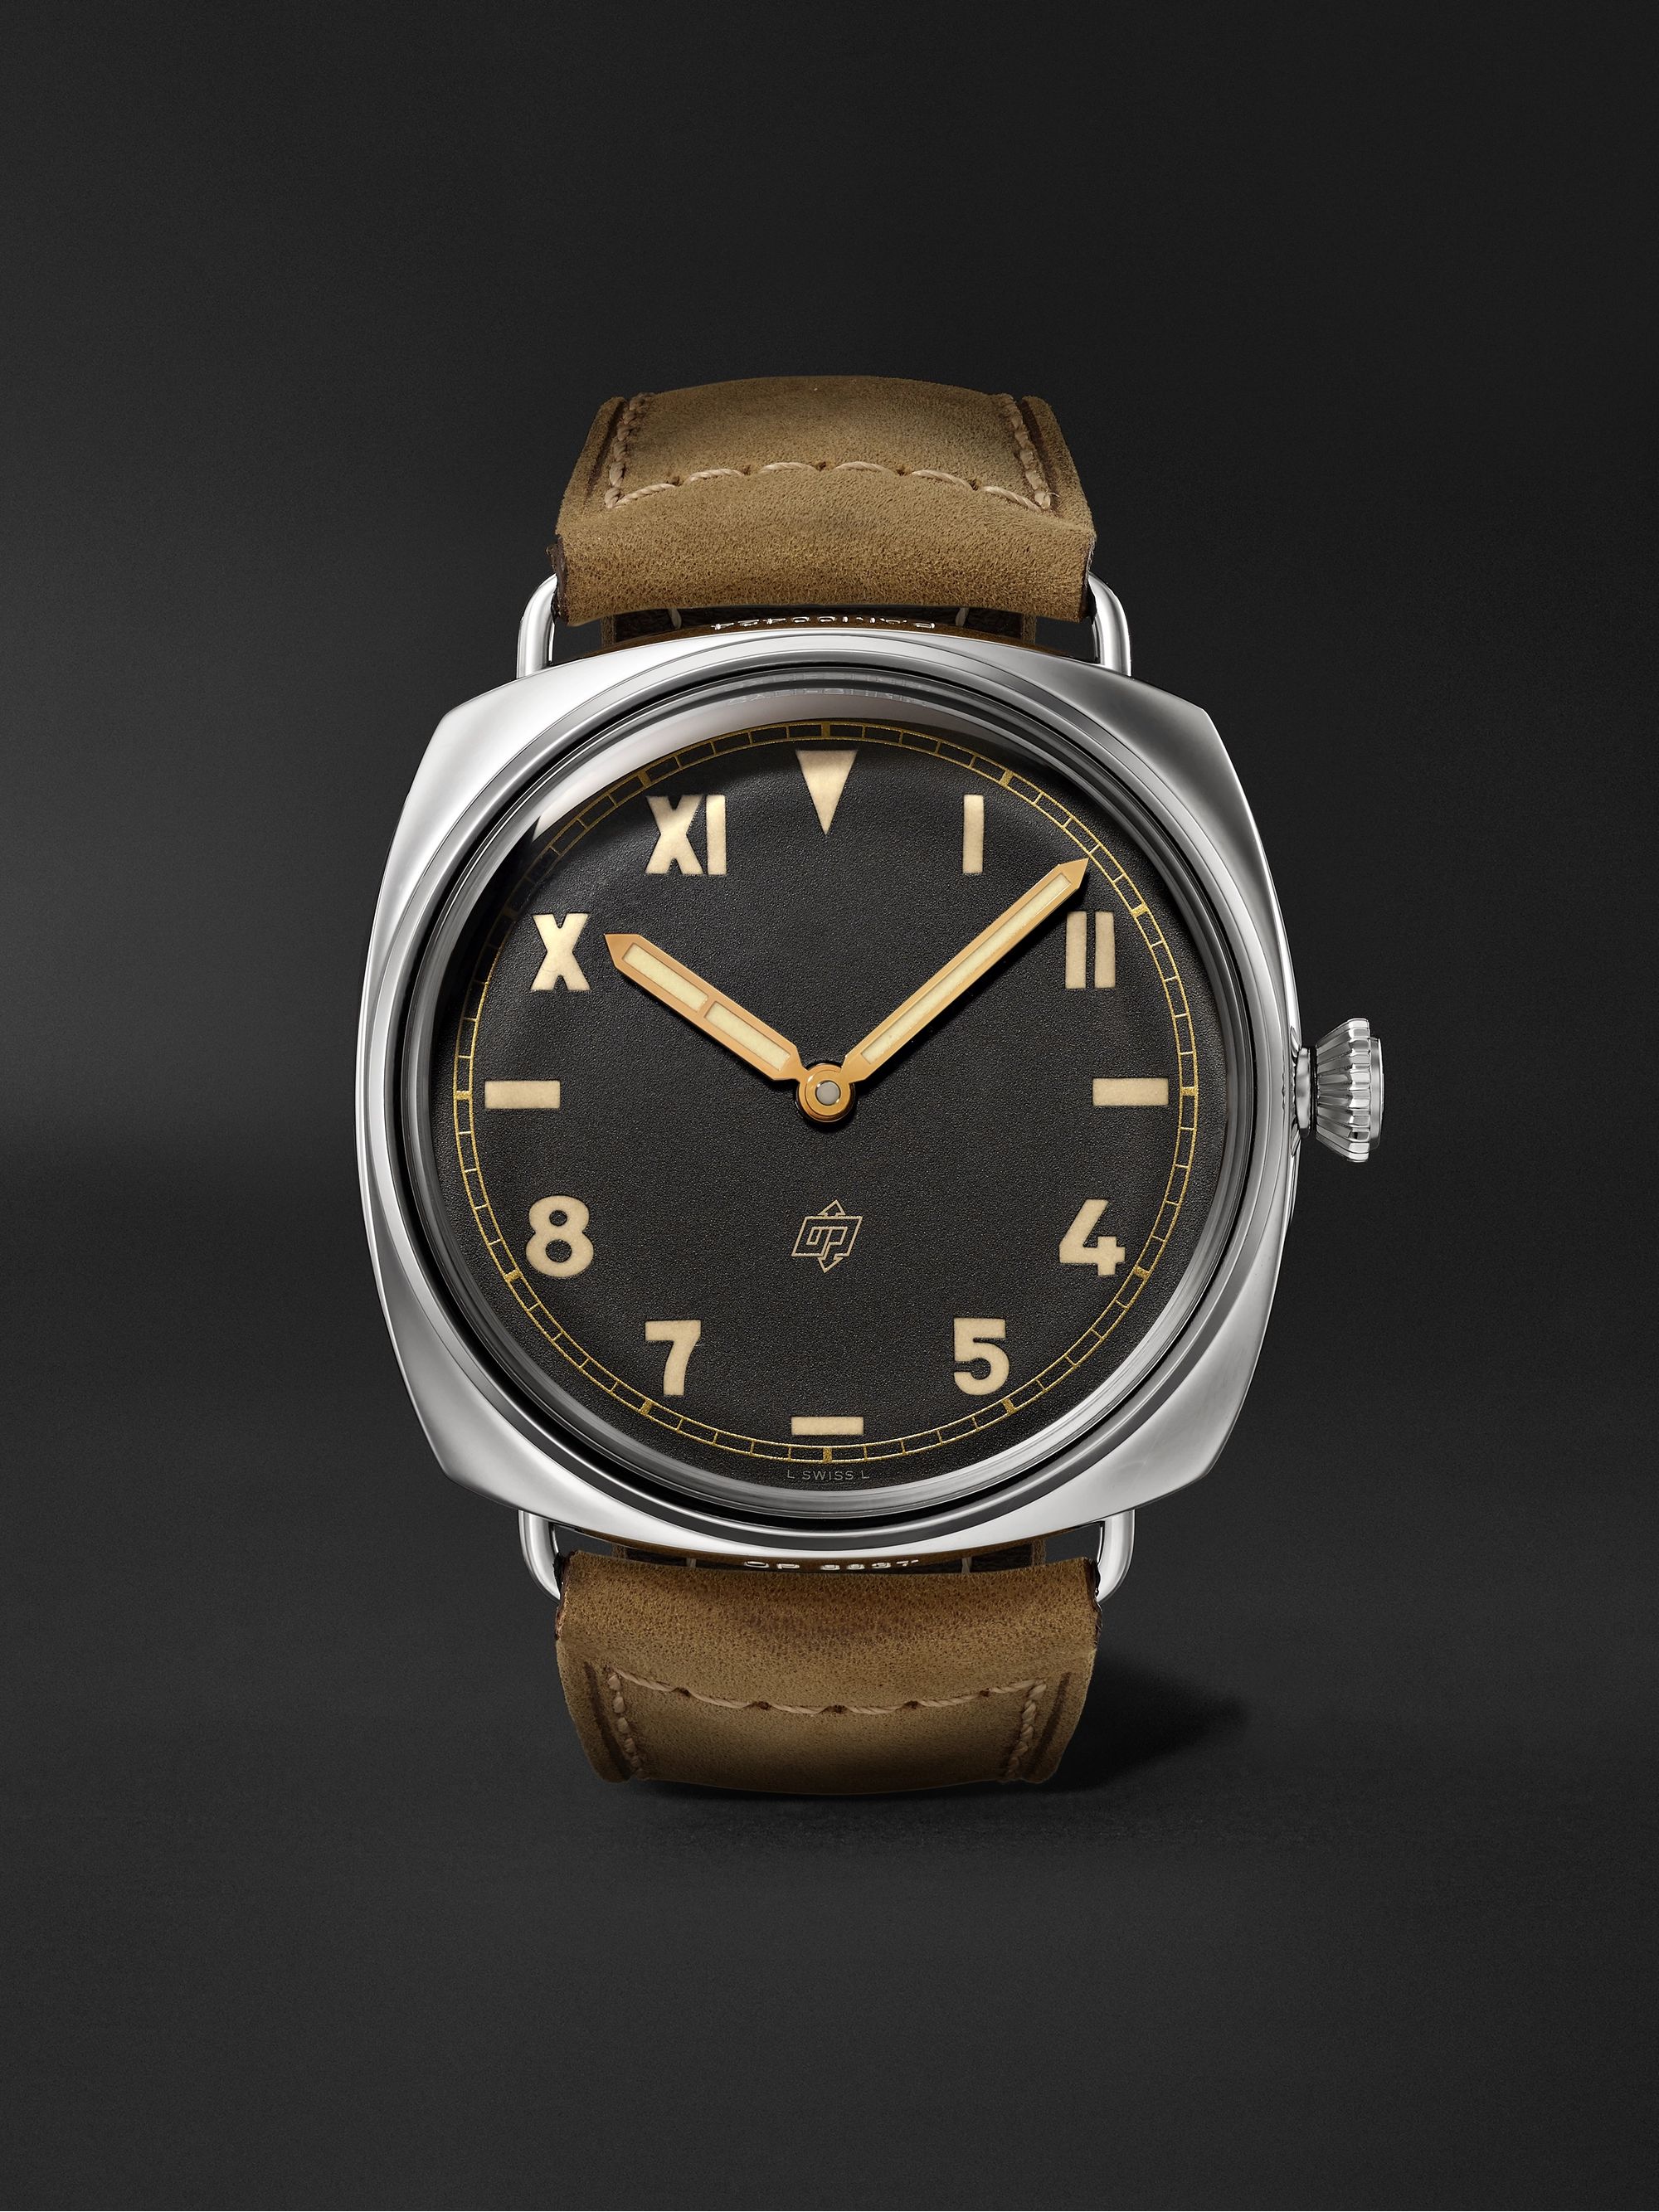 PANERAI Radiomir California Hand-Wound 47mm Stainless Steel and Leather Watch, Ref. No. PAM00424